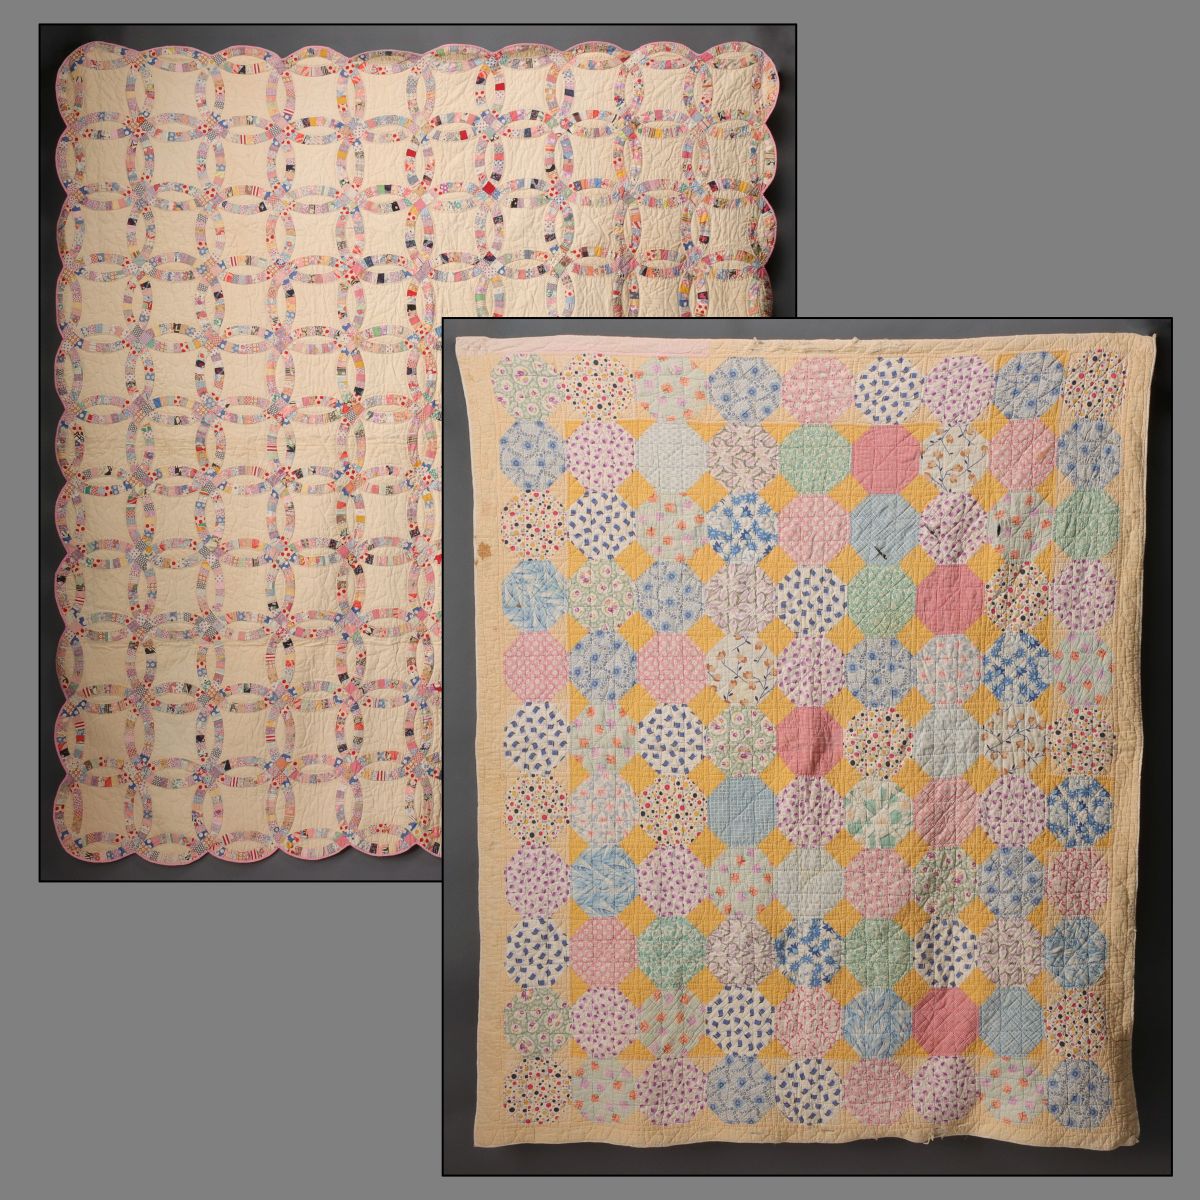 TWO FEED SACK QUILTS, CIRCA 1930s